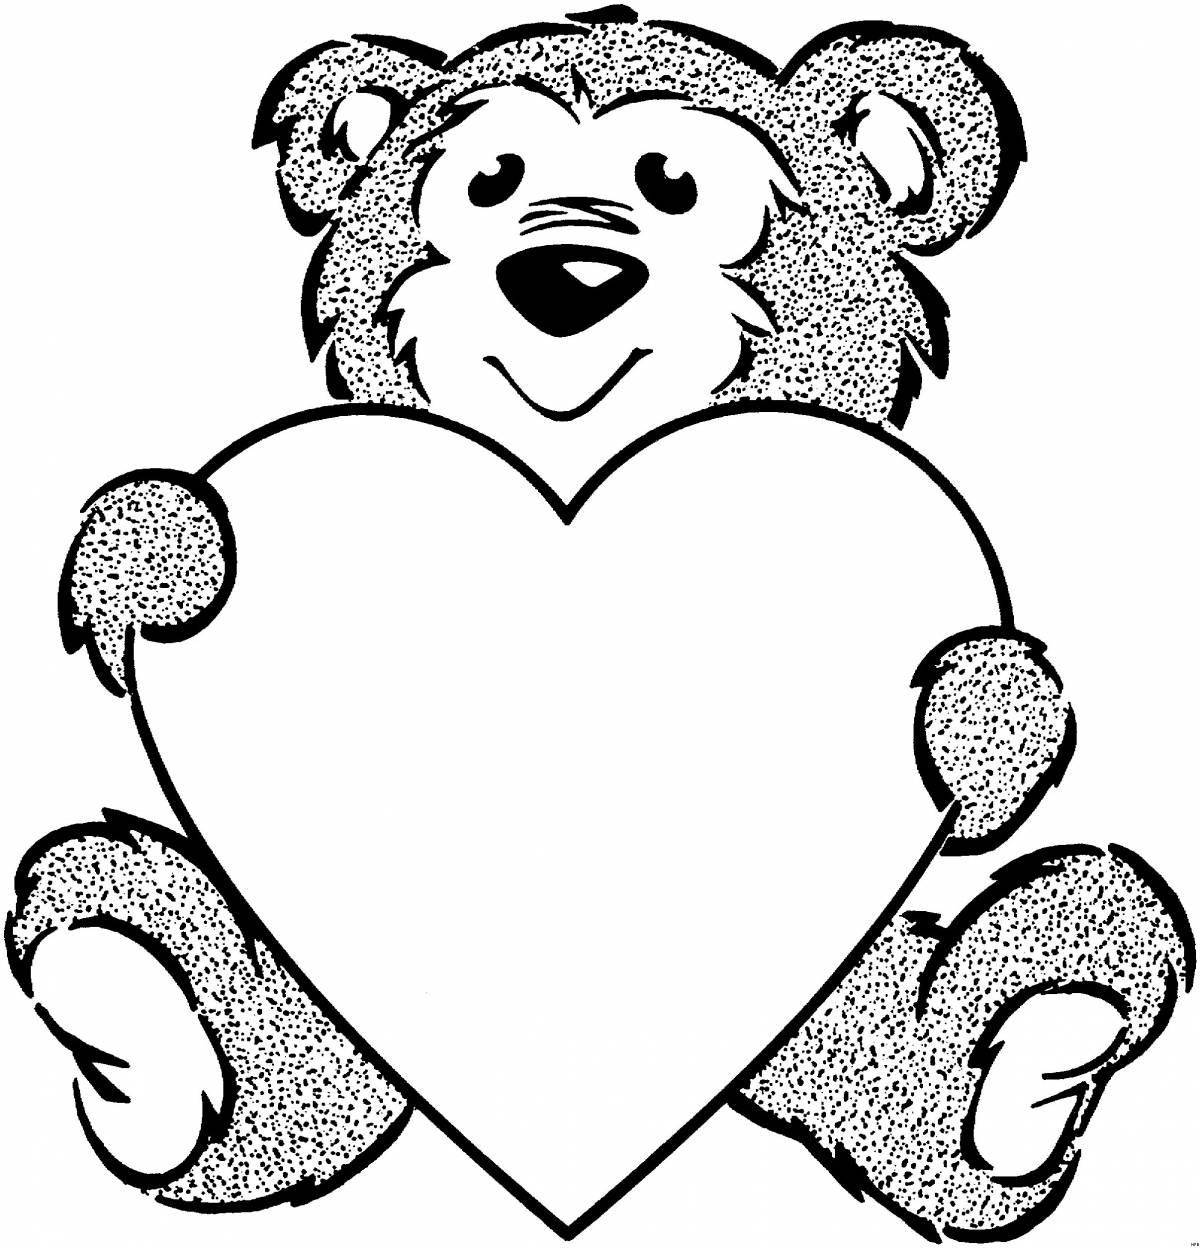 Glowing Heart Coloring Page for Toddlers